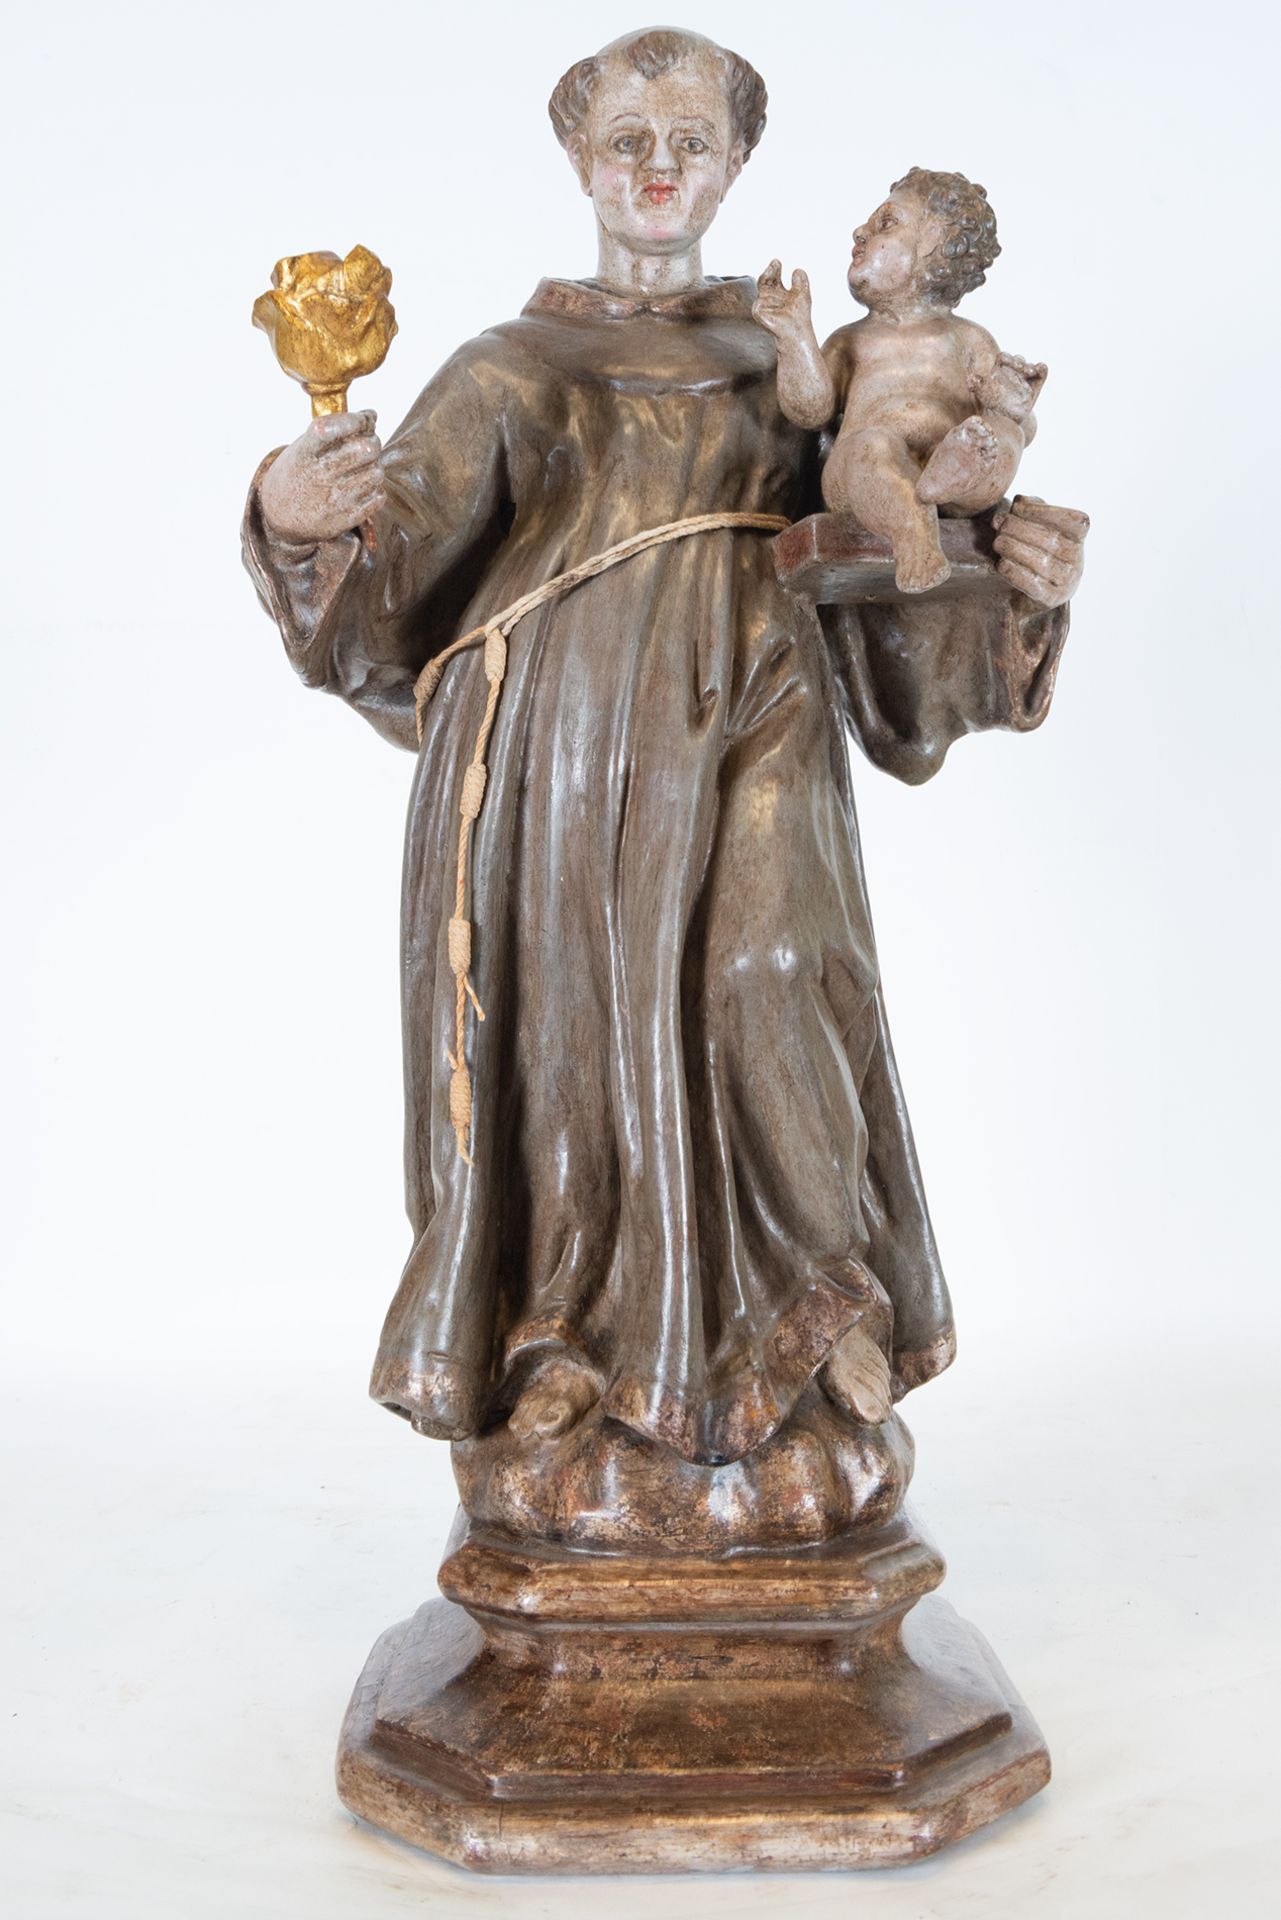 Saint Anthony with the Child Jesus in Arms, Catalan school of the 18th century